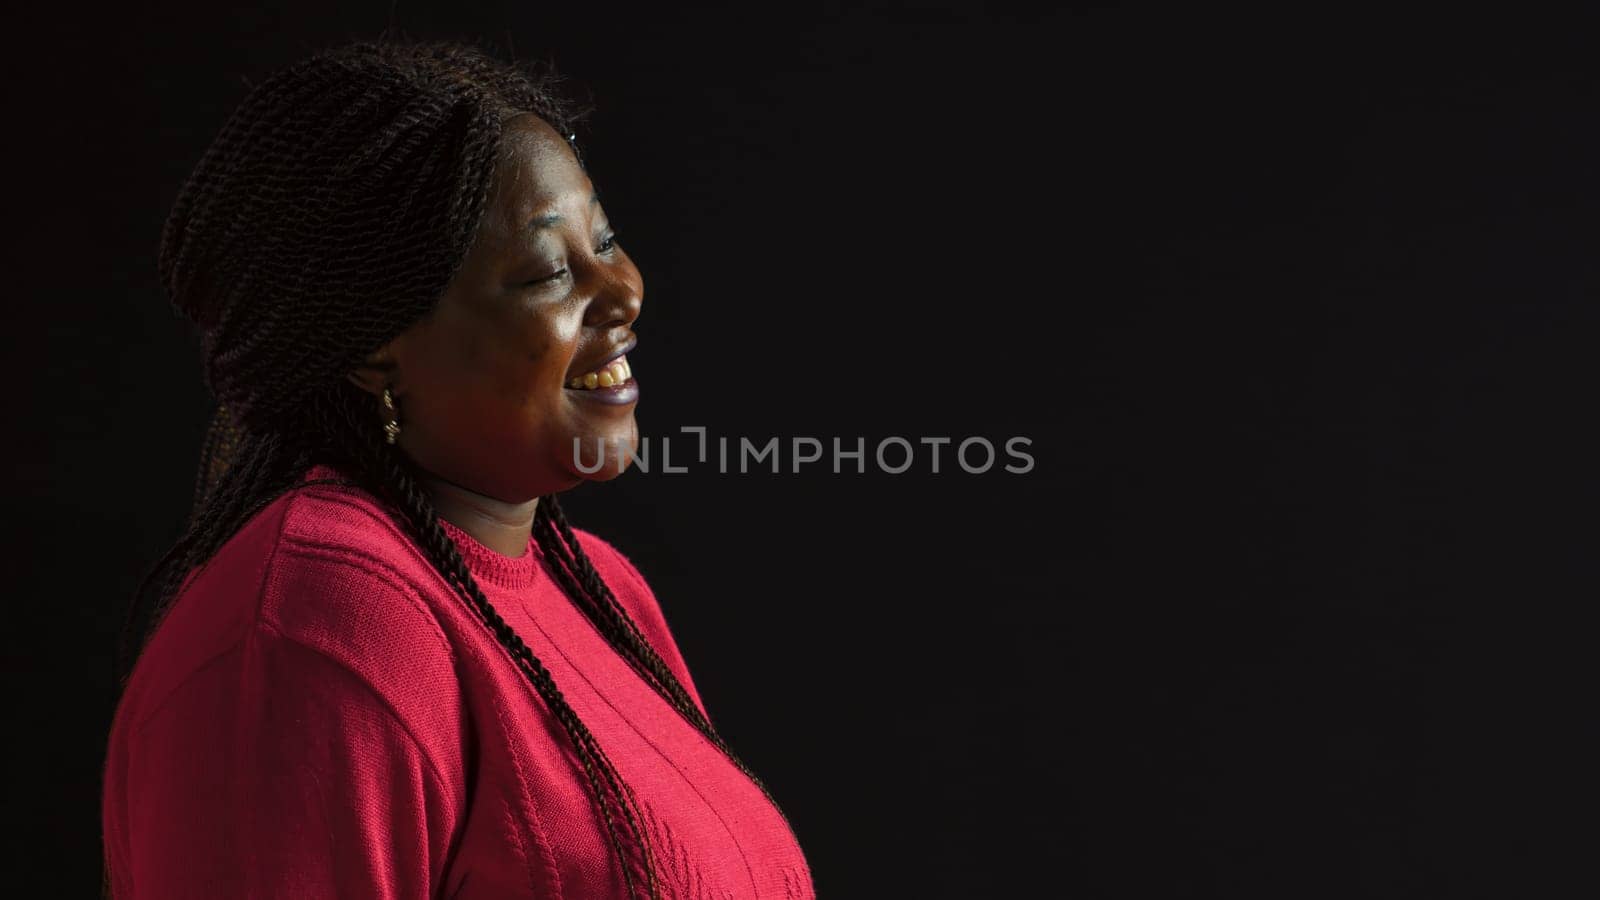 Beautiful african american woman giggling during picture shoot while dressed stylishly in pink. Laughing vibrant female fashionista model on isolated black background. Side-view portrait slow-mo.